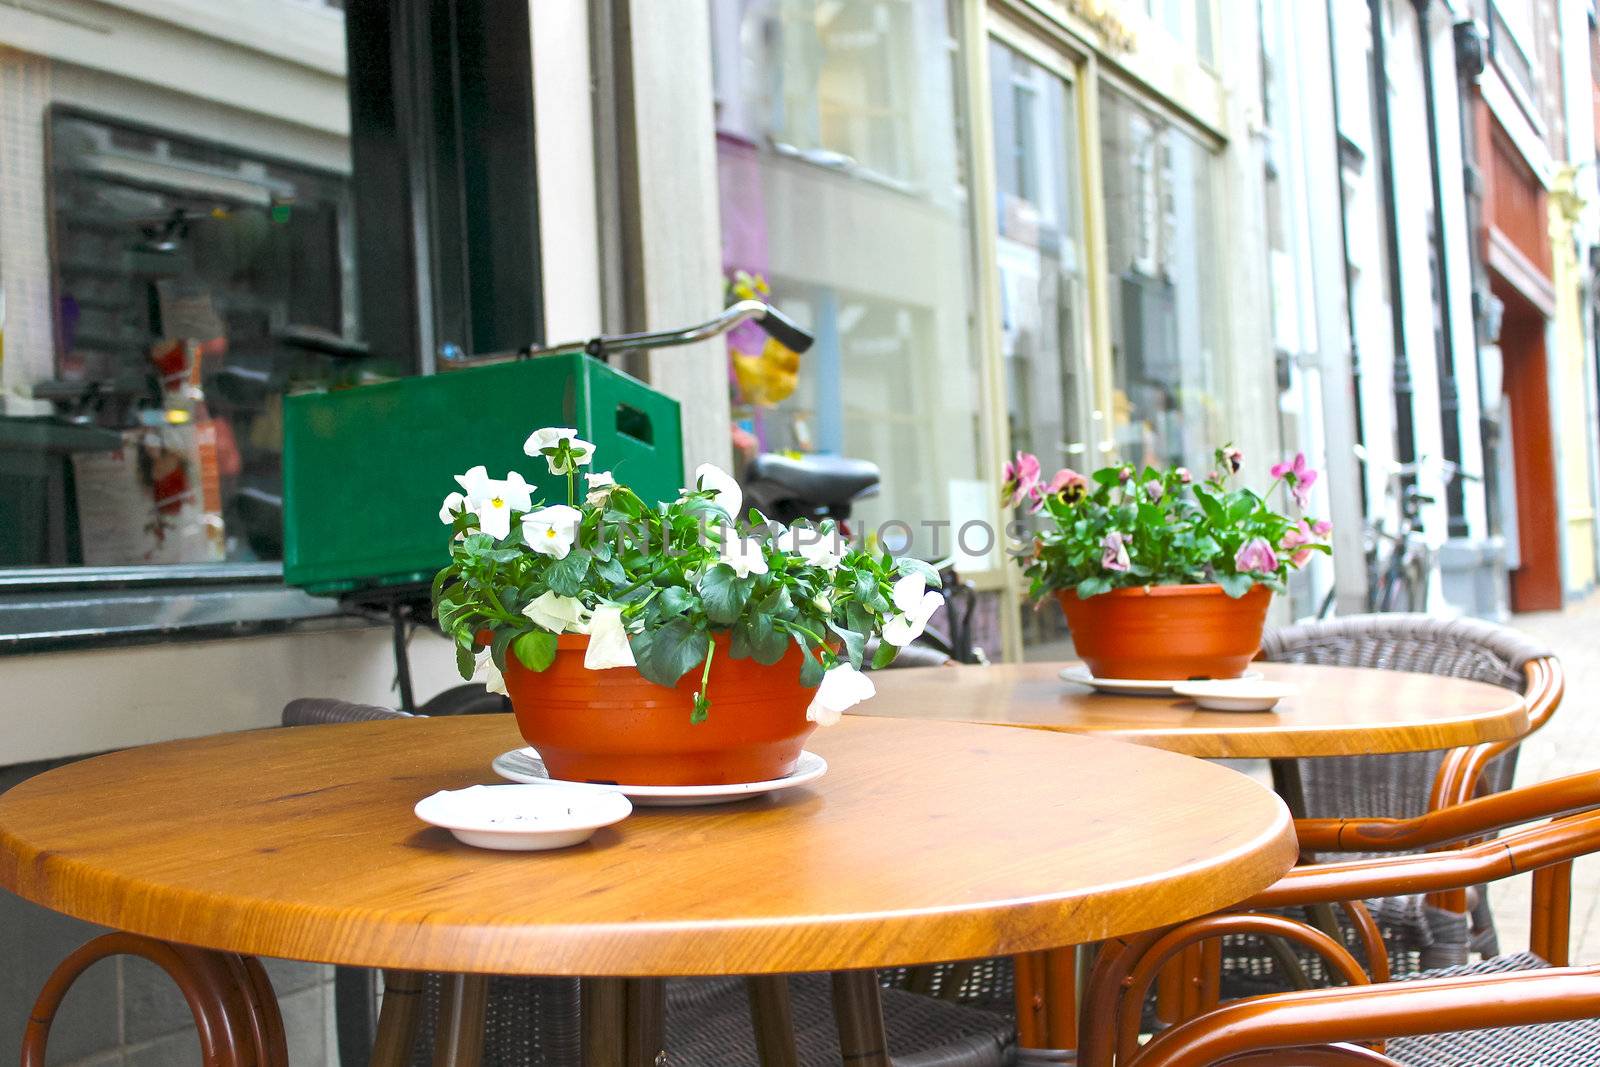 Flowers on the tables of street cafes. Gorinchem. Netherlands  by NickNick